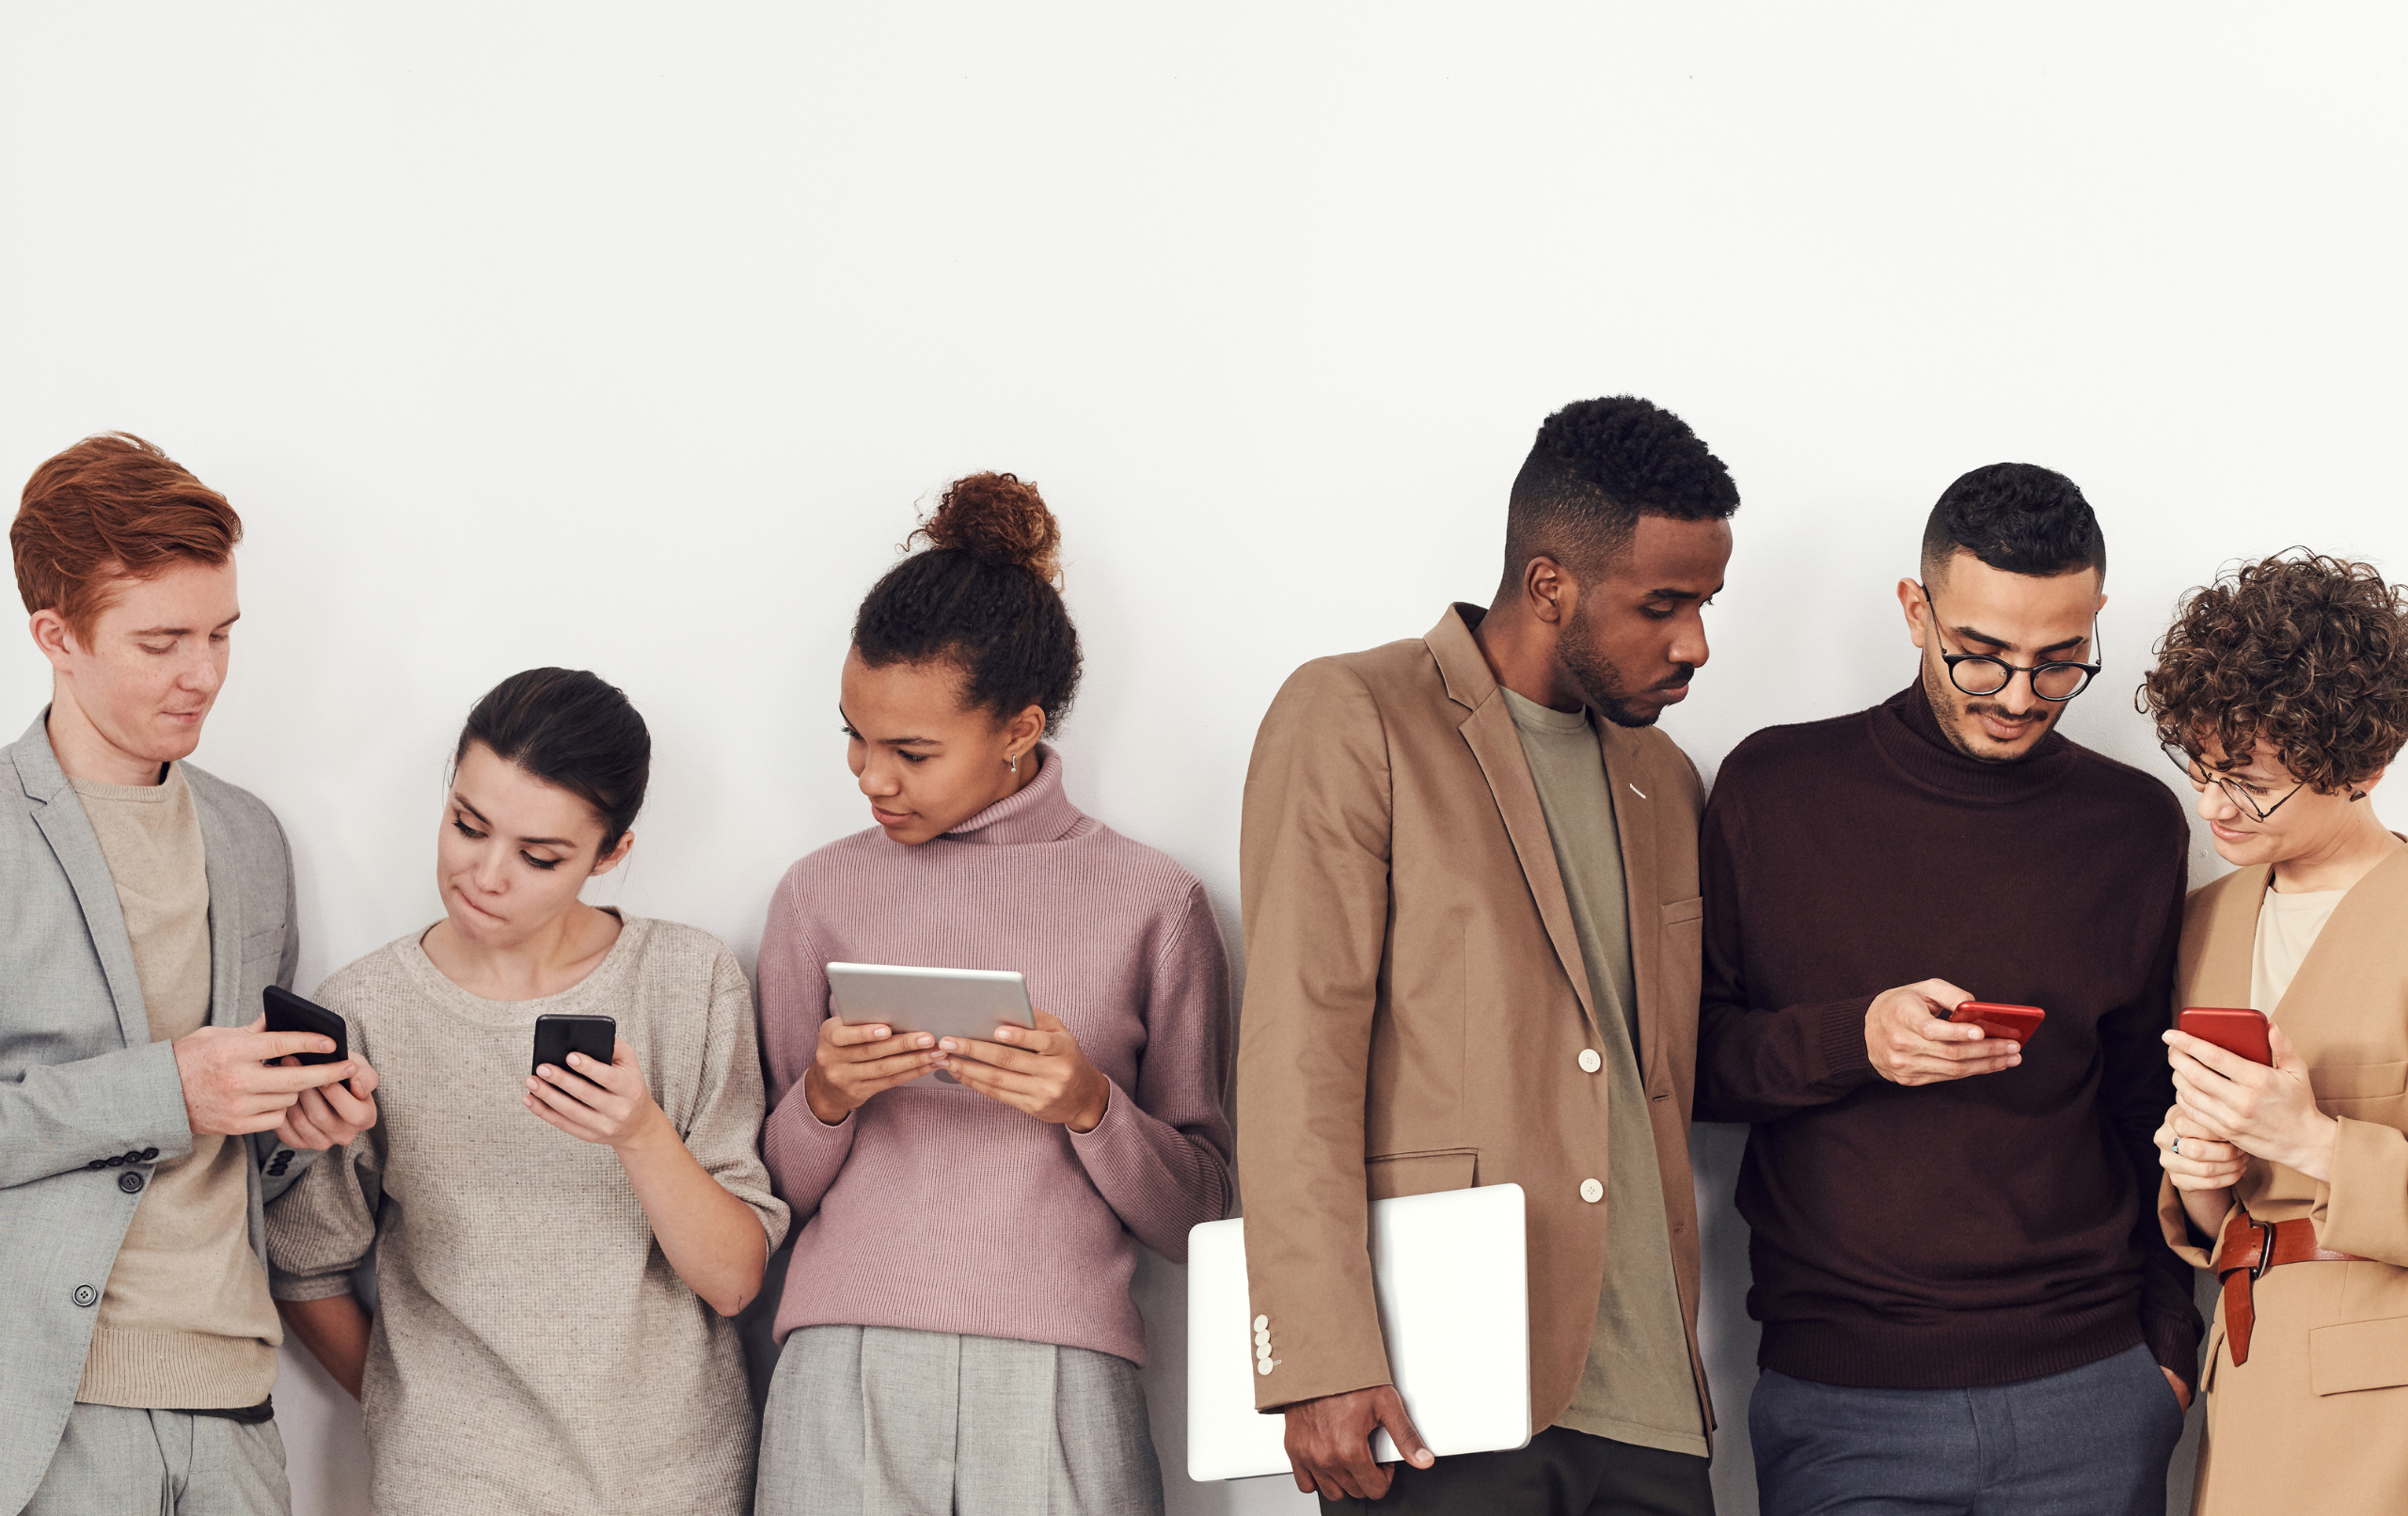 The pictures shows a group of six people of different genders and ethnicities in front of a white wall dressed in smart casual. They are each holding a phone, tablet or laptop.